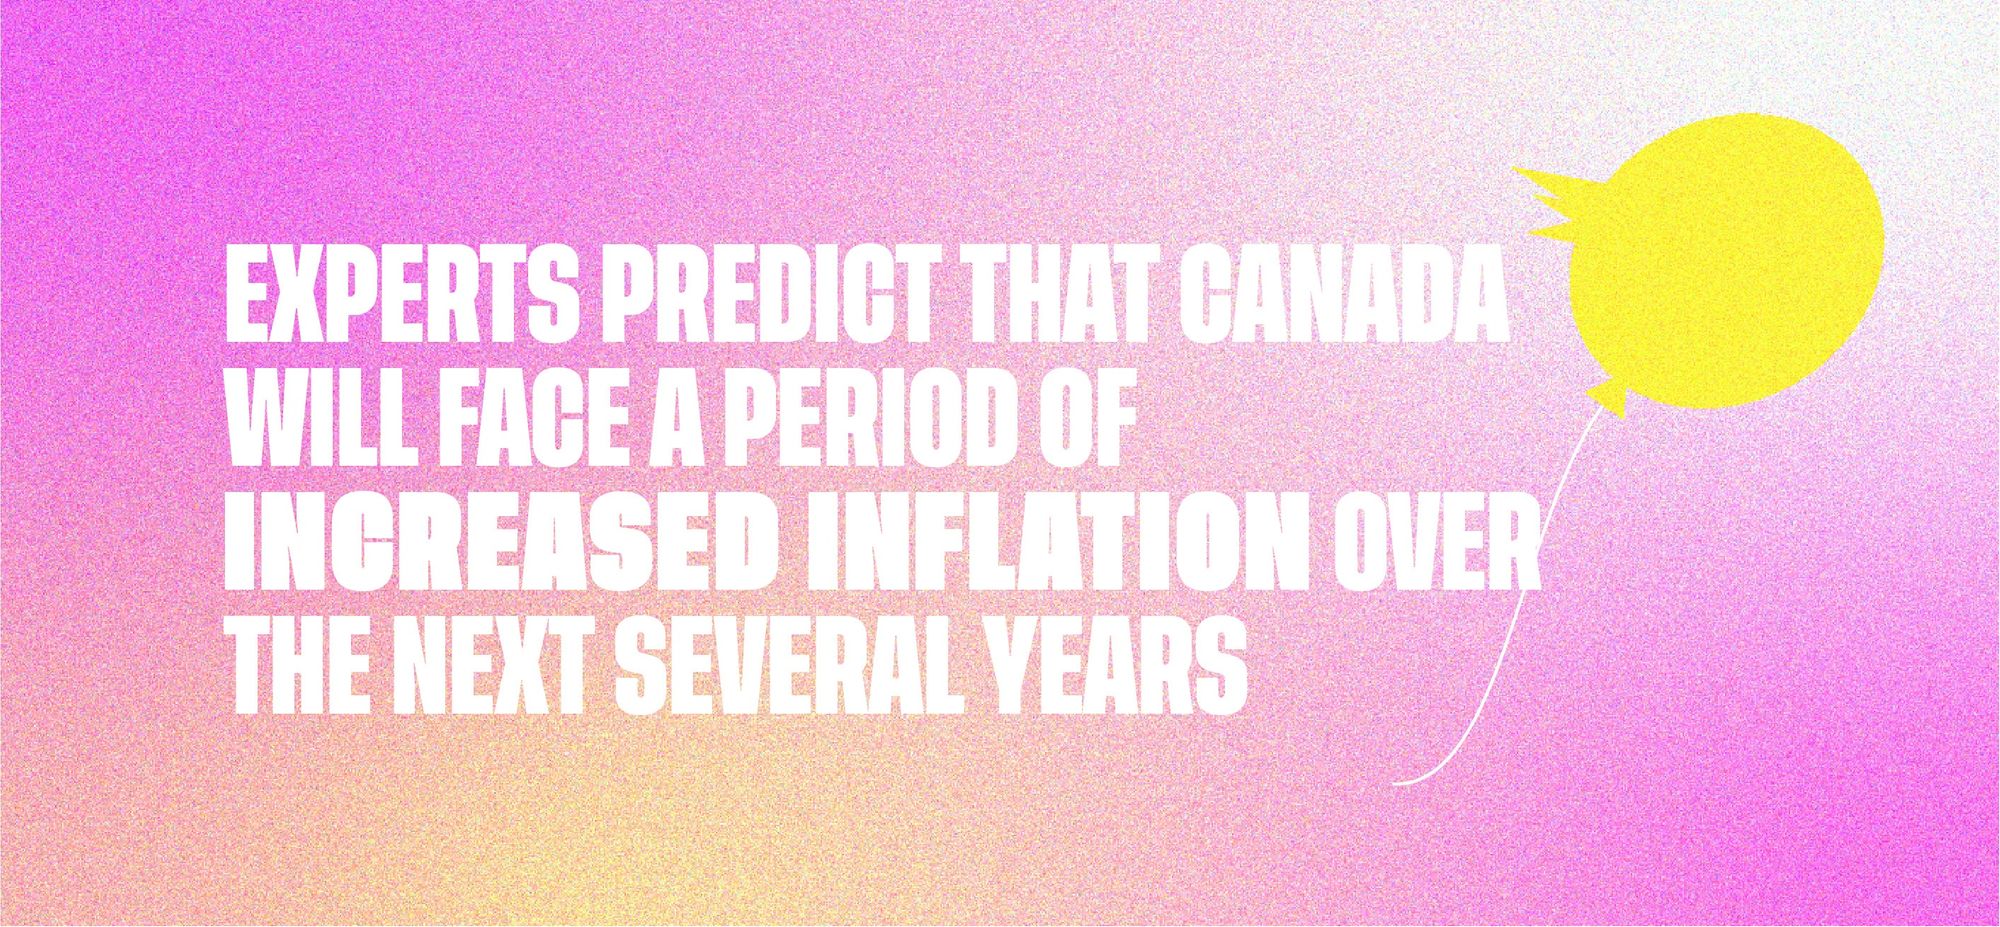 Experts predict that Canada will face a period of increased inflation over the next several years